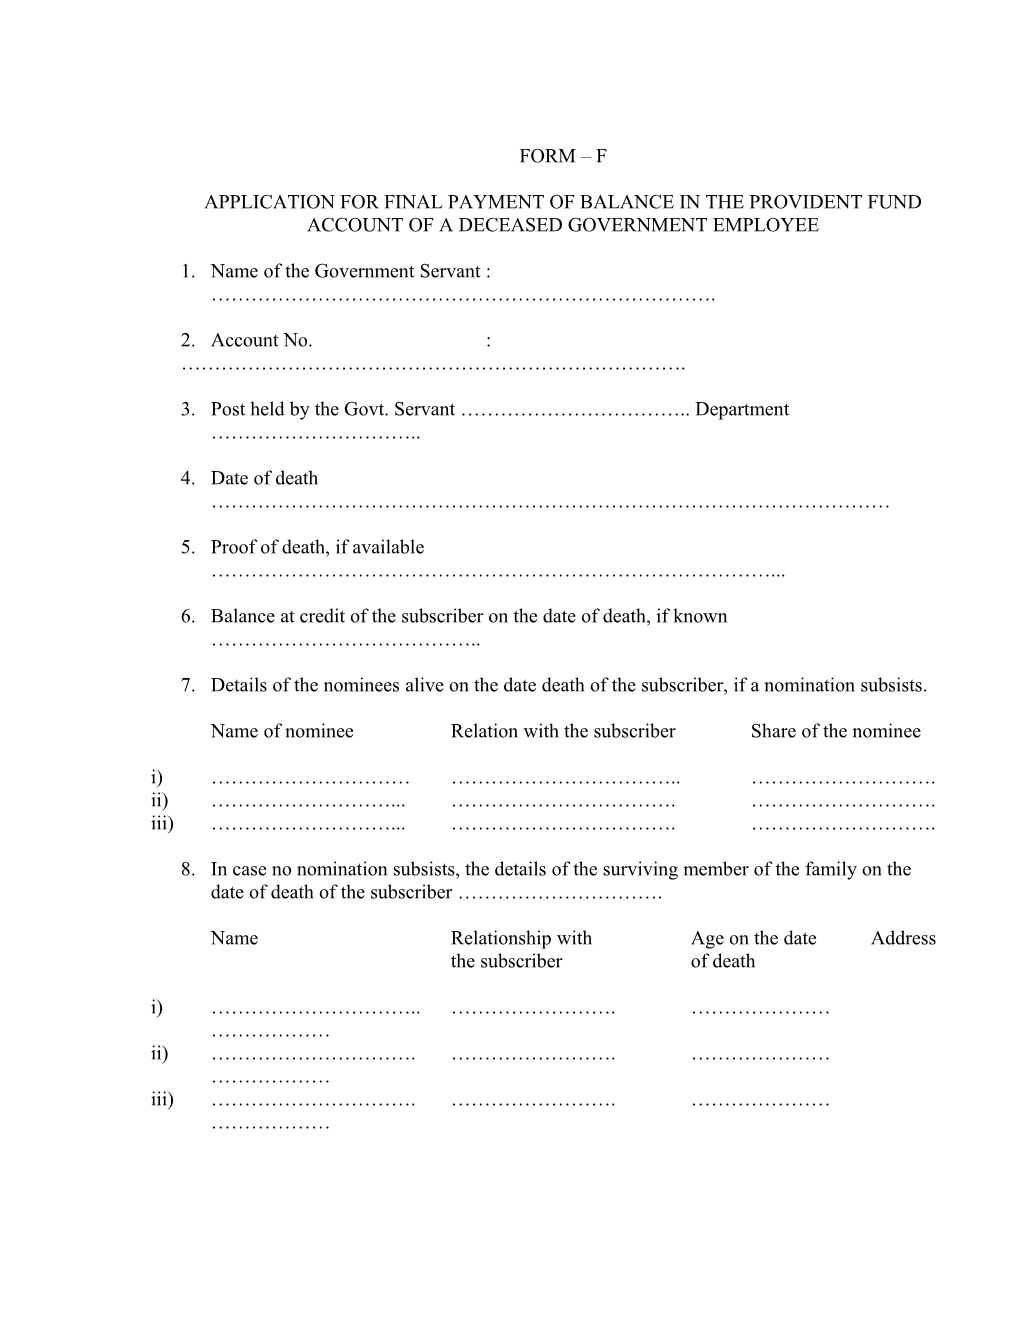 Application for Final Payment of Balance in the Provident Fund Account of a Deceased Government